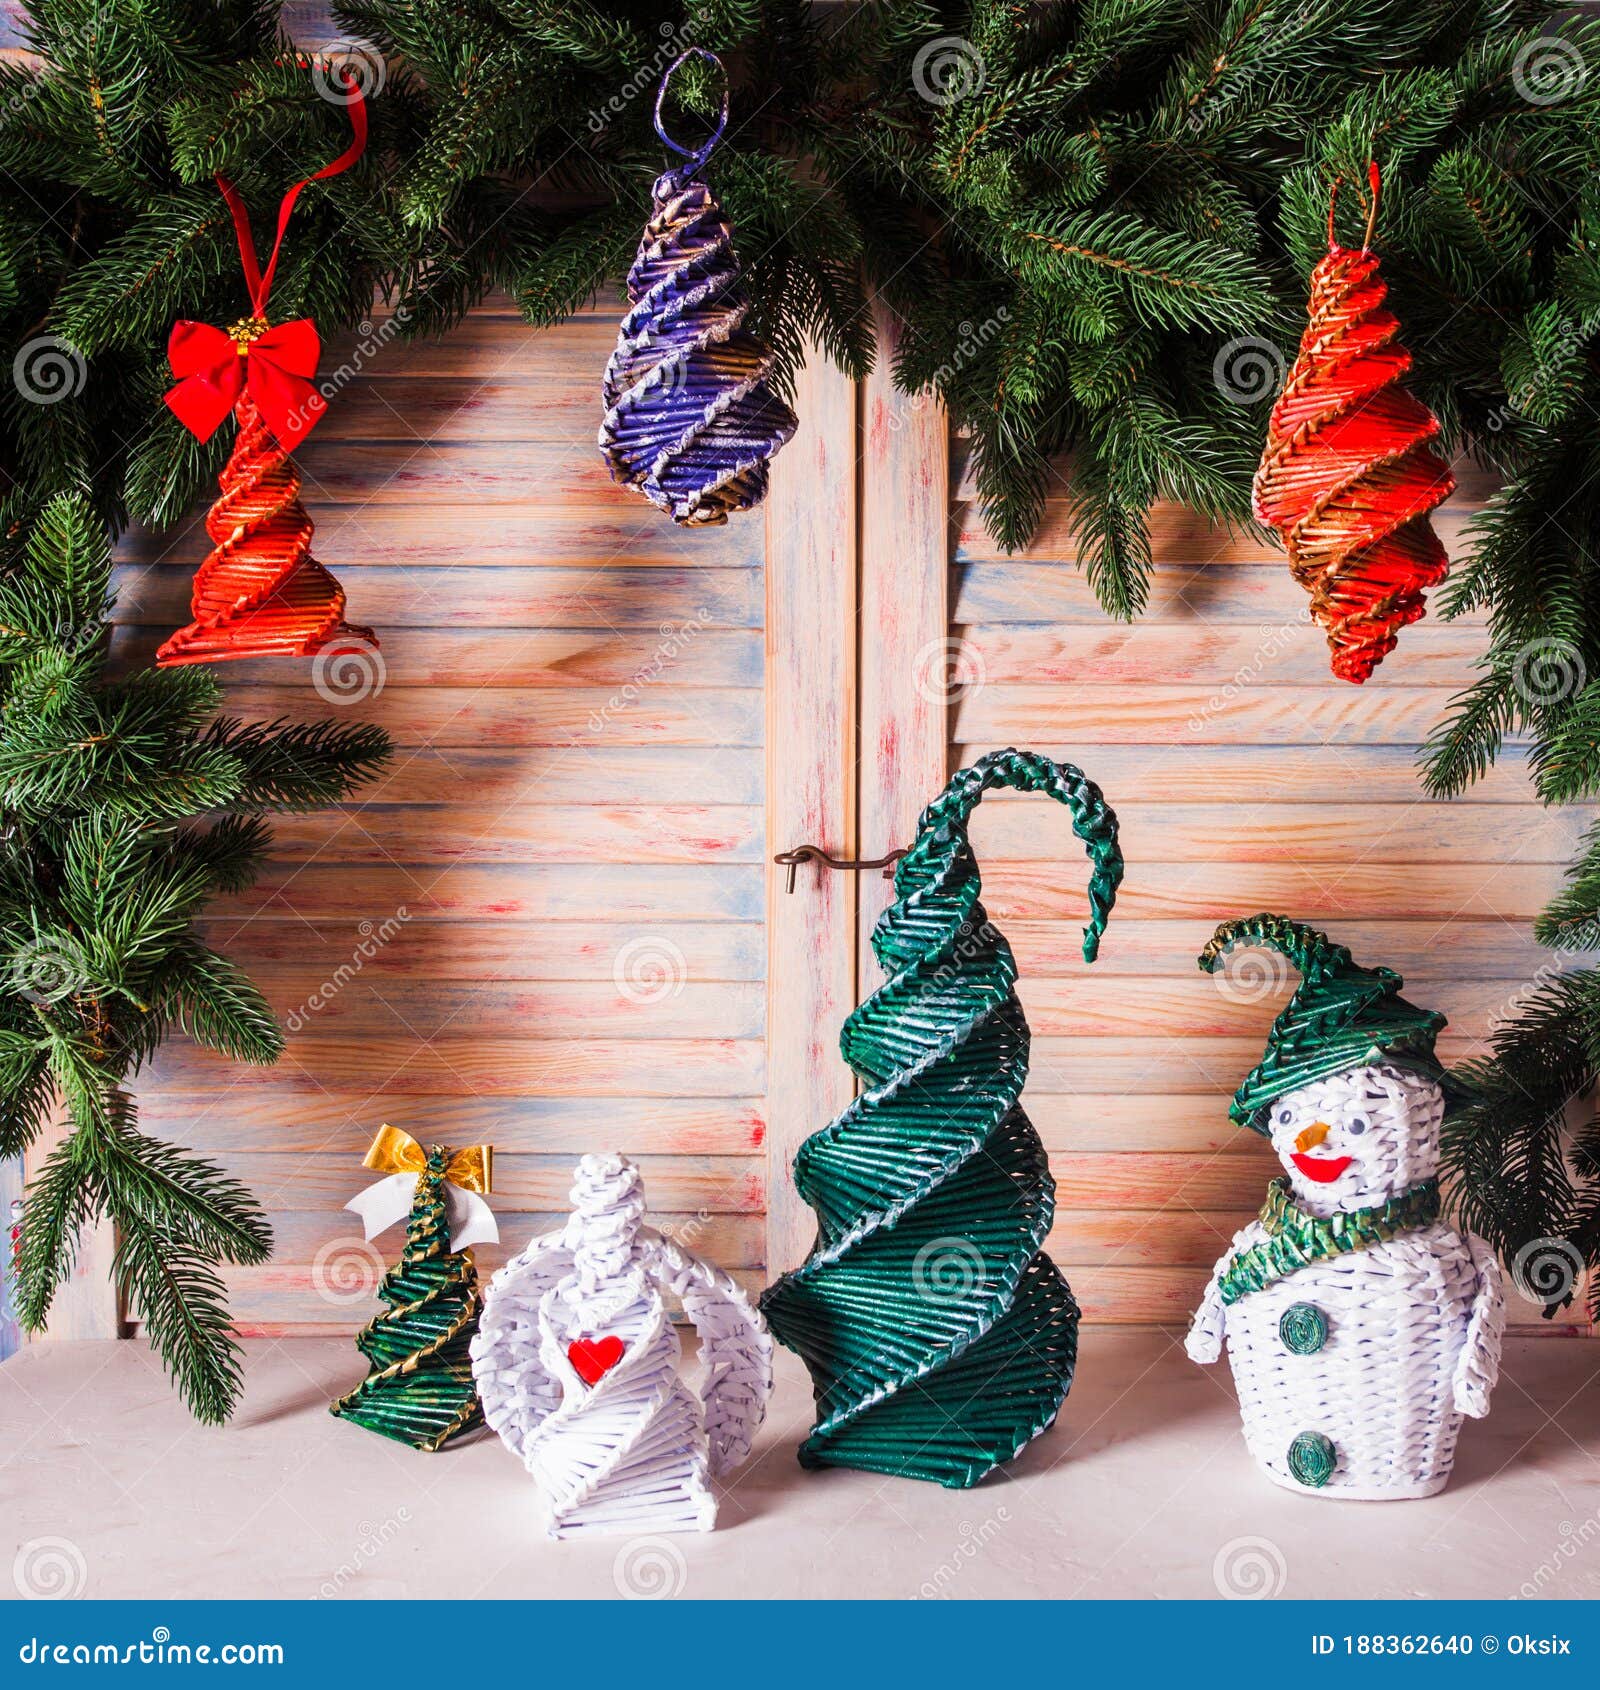 https://thumbs.dreamstime.com/z/christmas-toys-made-reusable-paper-straws-peace-fir-tree-set-twisted-tubes-snowman-bells-winter-decoration-zero-waste-188362640.jpg